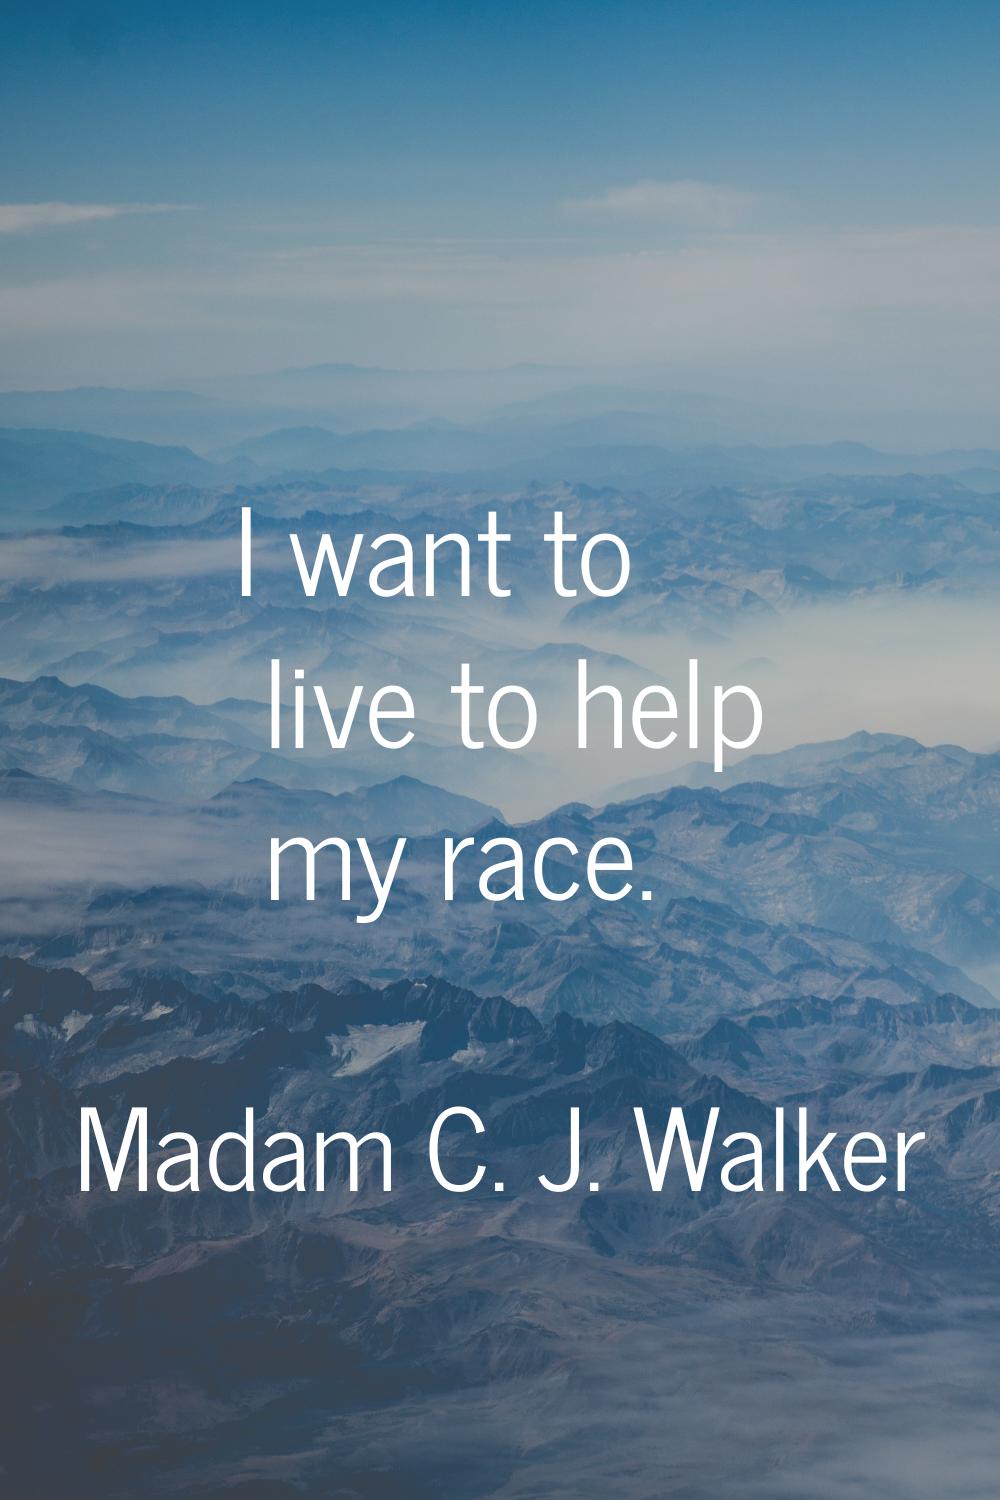 I want to live to help my race.